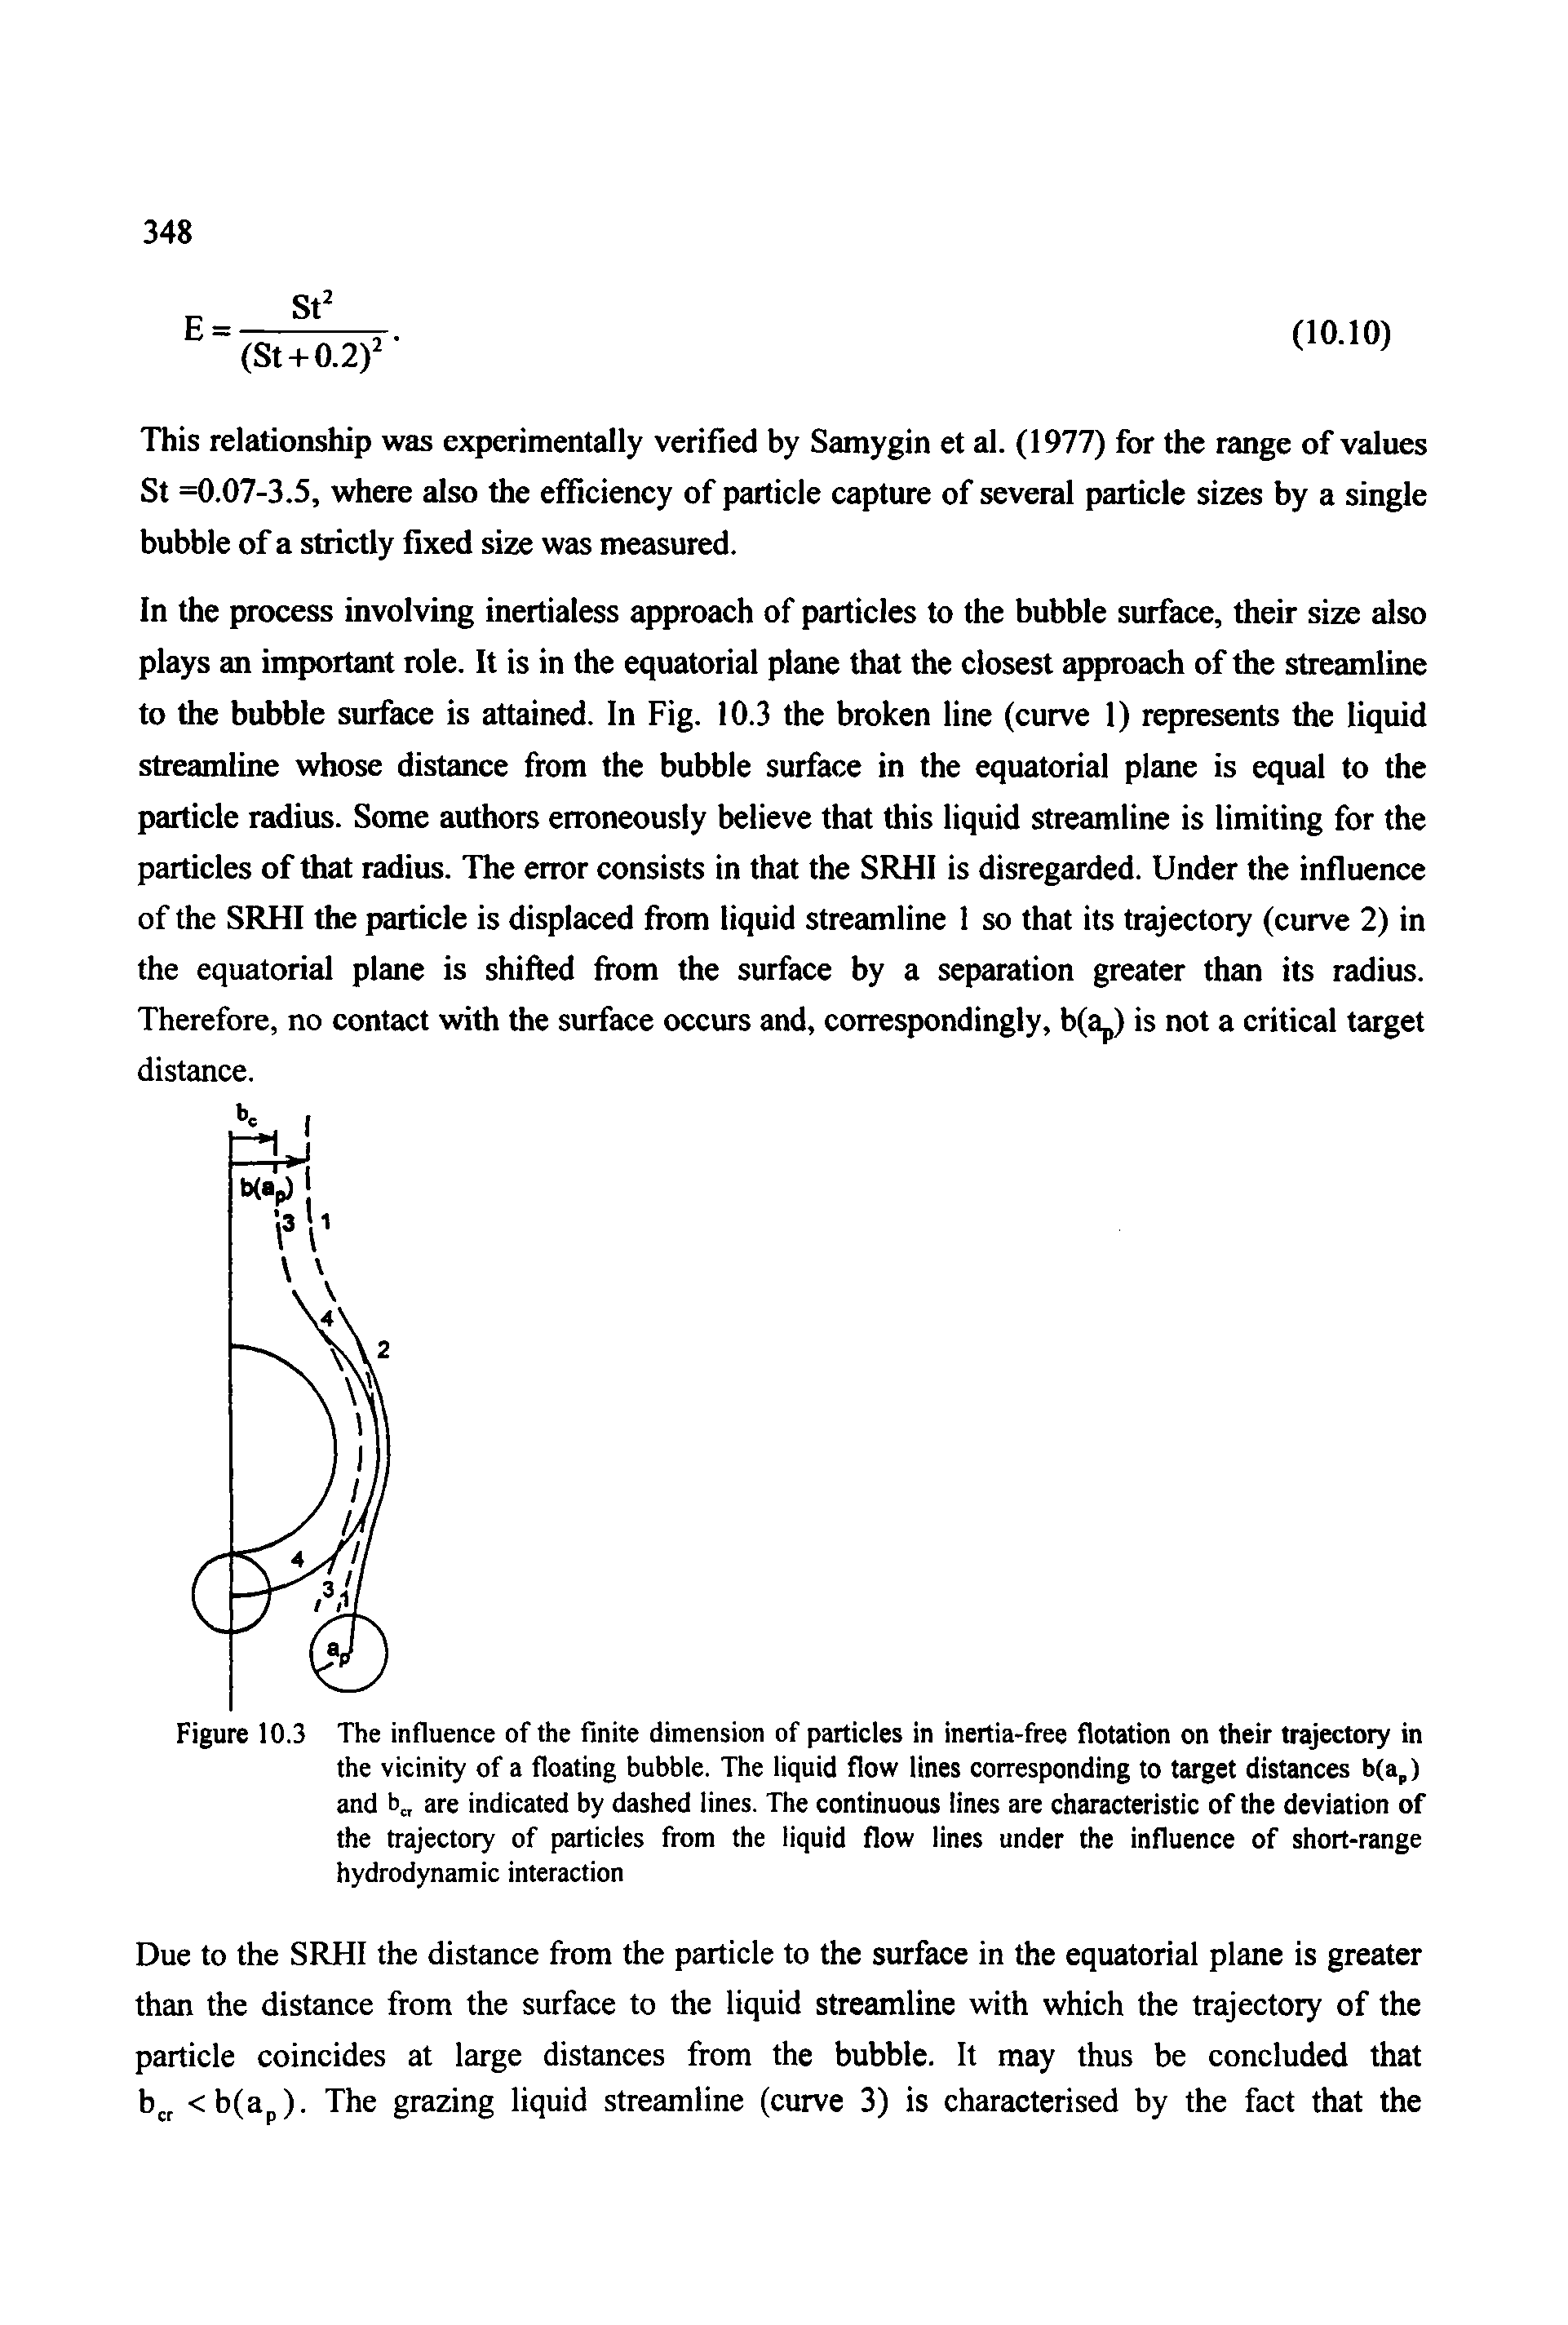 Figure 10.3 The influence of the finite dimension of particles in inertia-free flotation on their trajectory in the vicinity of a floating bubble. The liquid flow lines corresponding to target distances b(a,) and are indicated by dashed lines. The continuous lines are characteristic of the deviation of the trajectory of particles from the liquid flow lines under the influence of short-range hydrodynamic interaction...